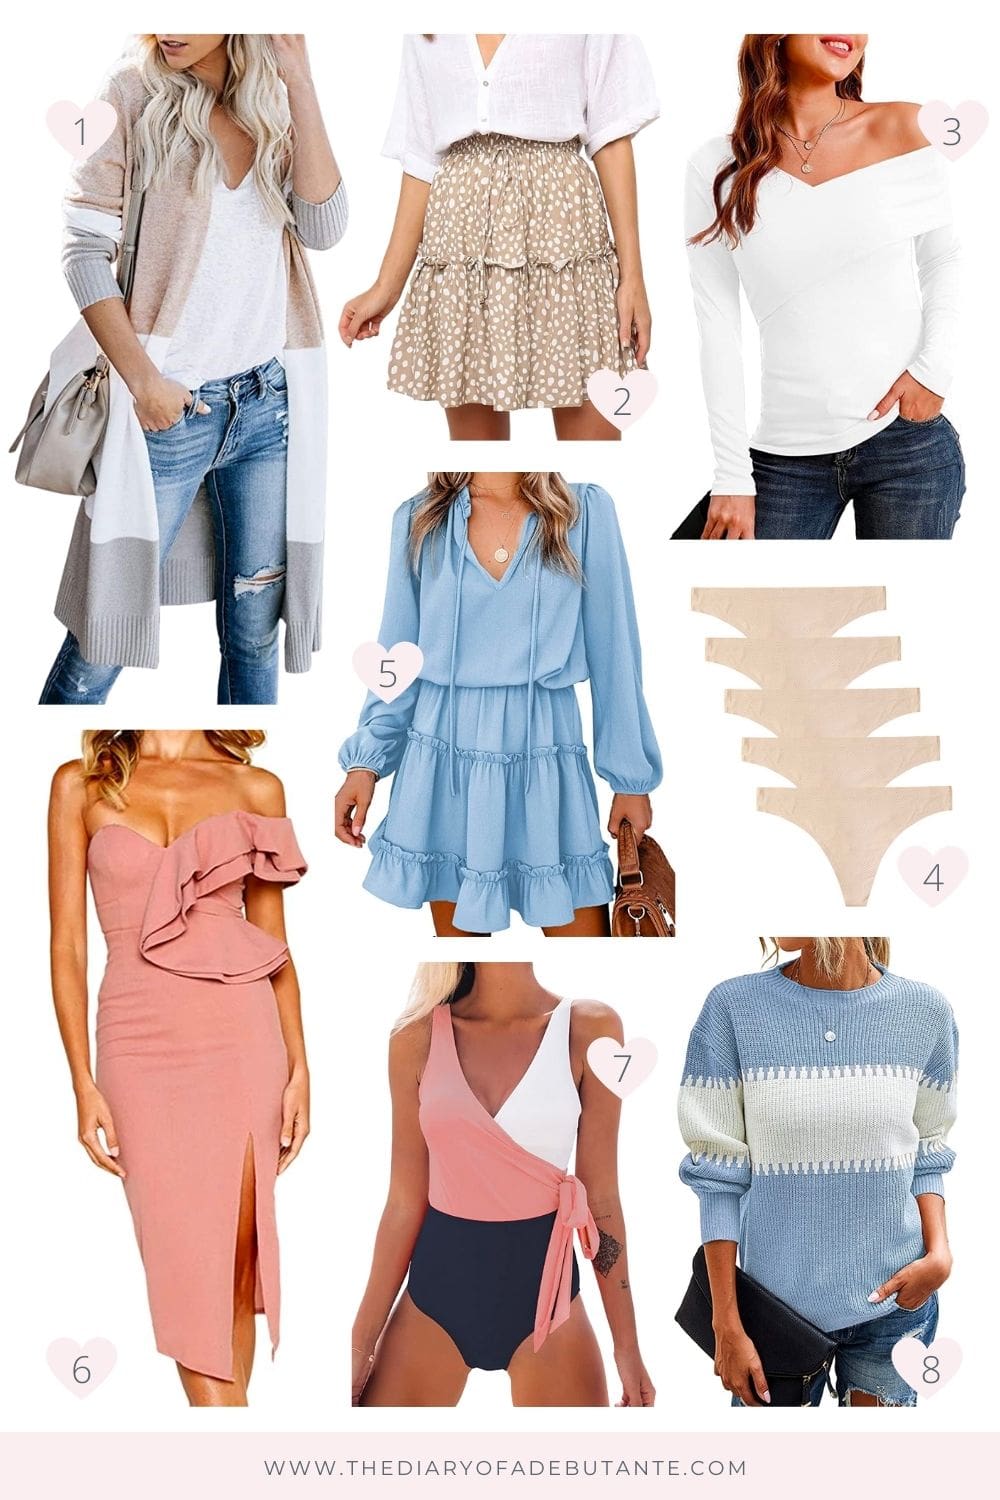 Top Amazon Fashion purchases of 2021 rounded up by affordable fashion blogger Stephanie Ziajka on Diary of a Debutante